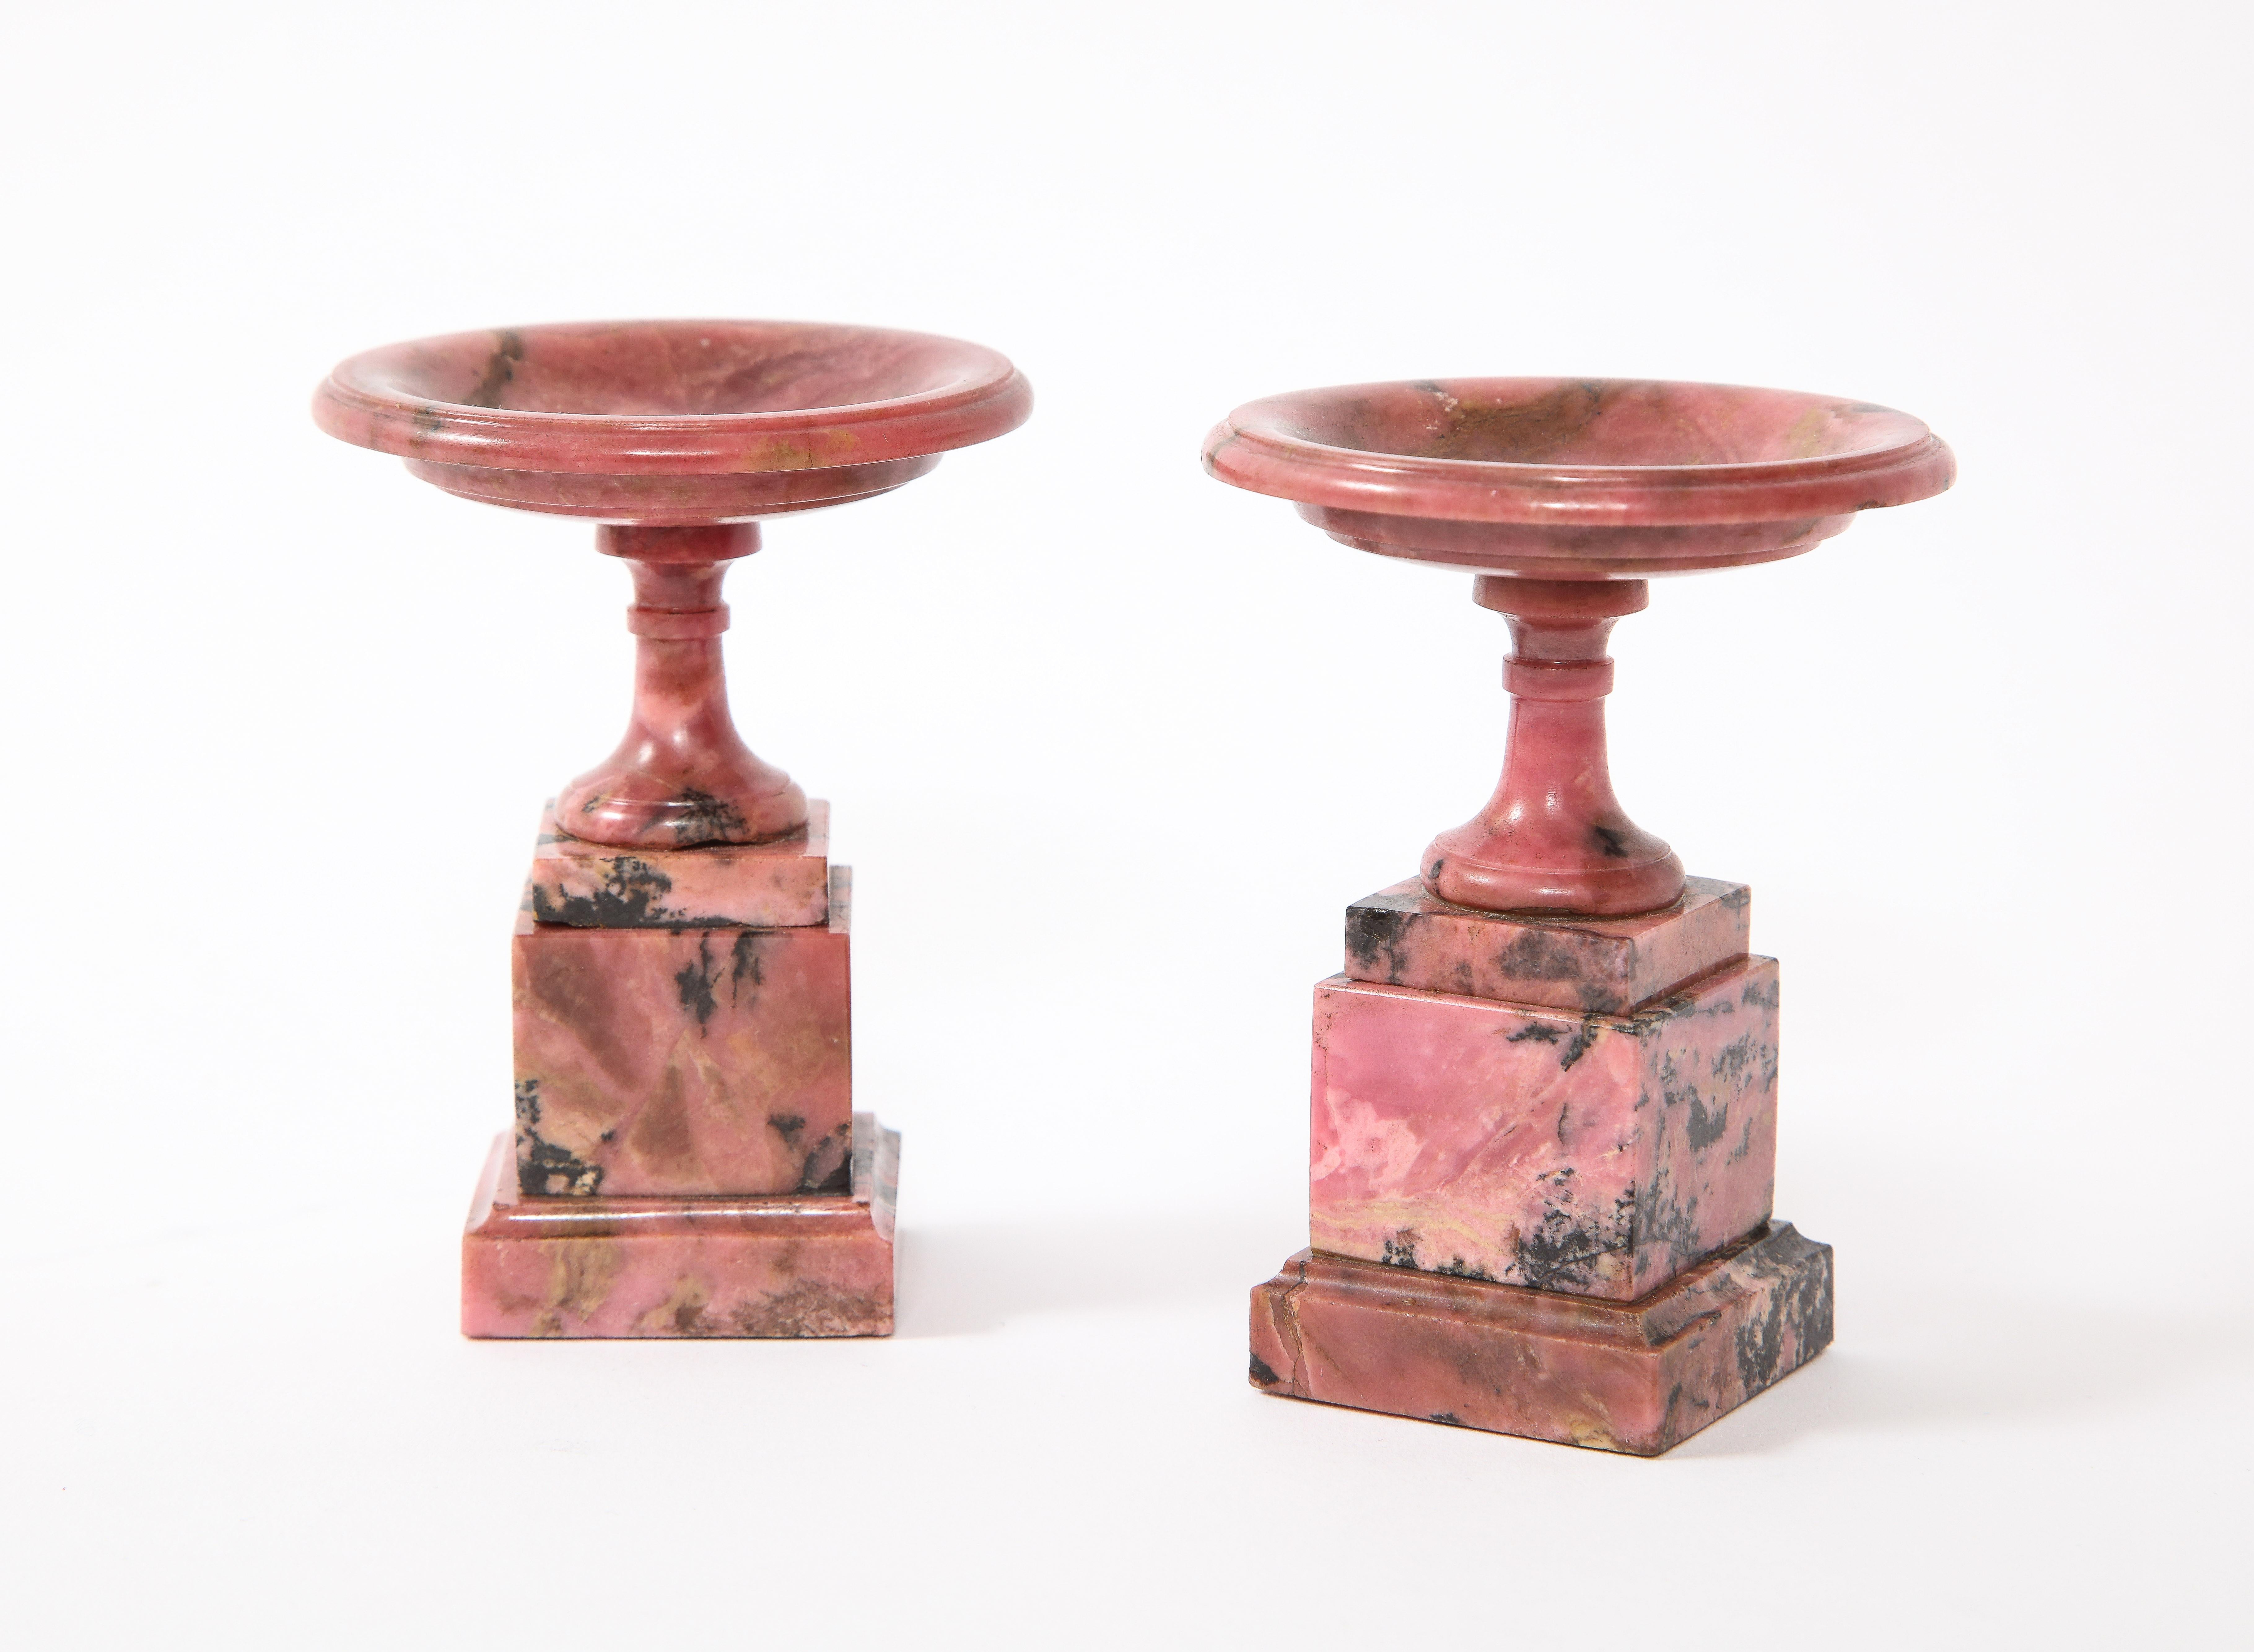 Neoclassical Rare Pair of Early 19th Century Russian Hand Carved Rhodonite Tazzas